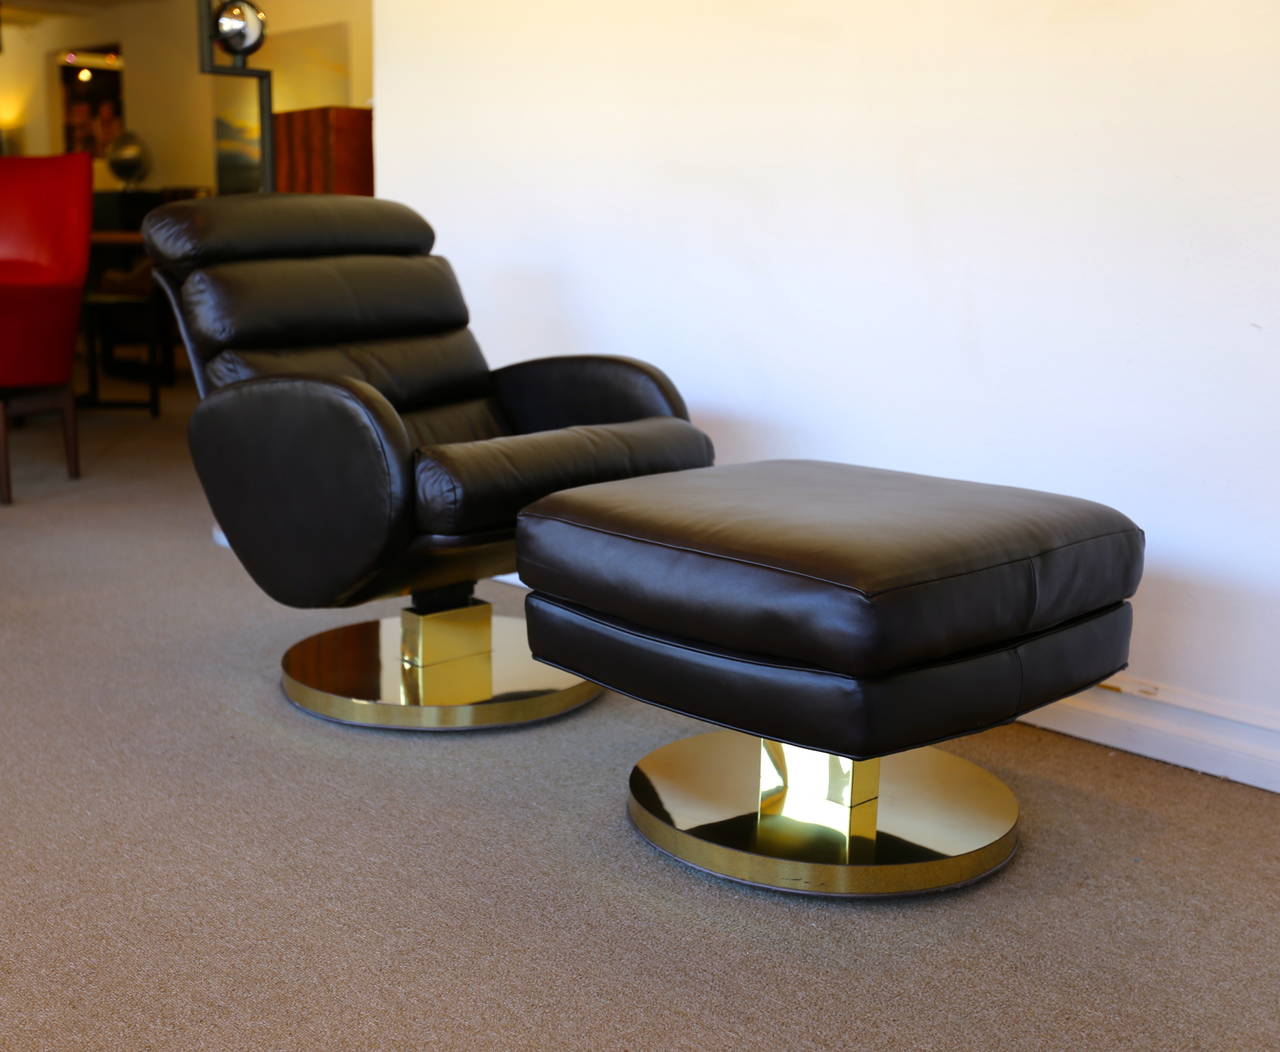 Leather and brass lounge chair and ottoman by Milo Baughman for Thayer Coggin. The lounge chair tilts and both the chair and ottoman swivel.